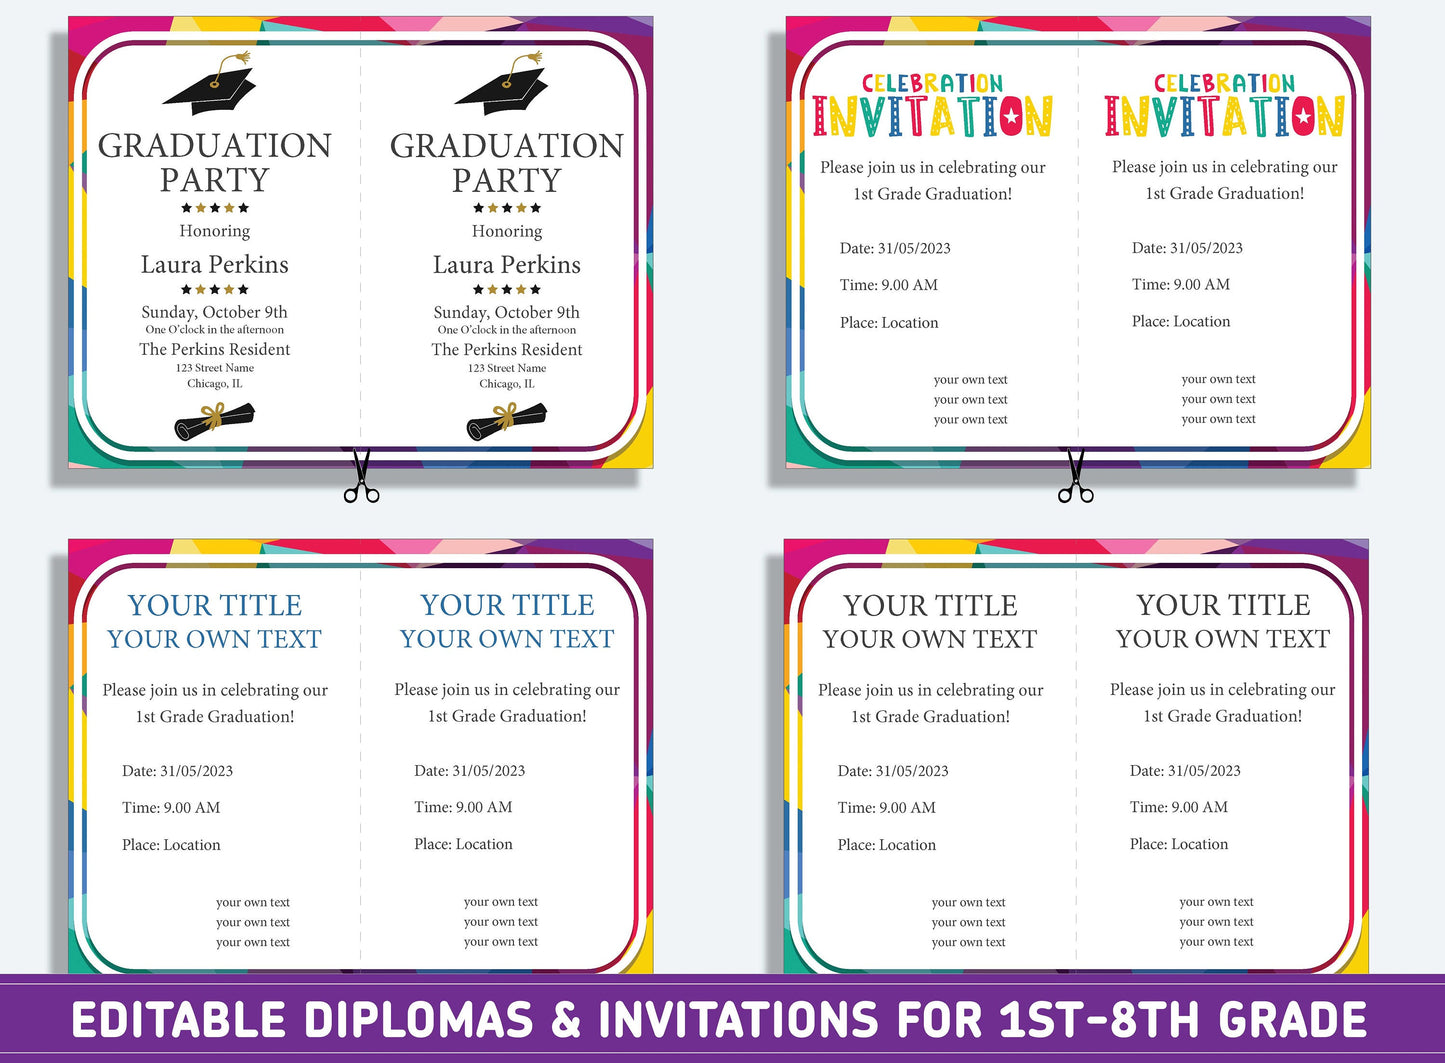 Editable 4th Grade Graduation, 1st to 8th Grade Diploma, Certificate of Completion & Invitation, PDF File, Instant Download